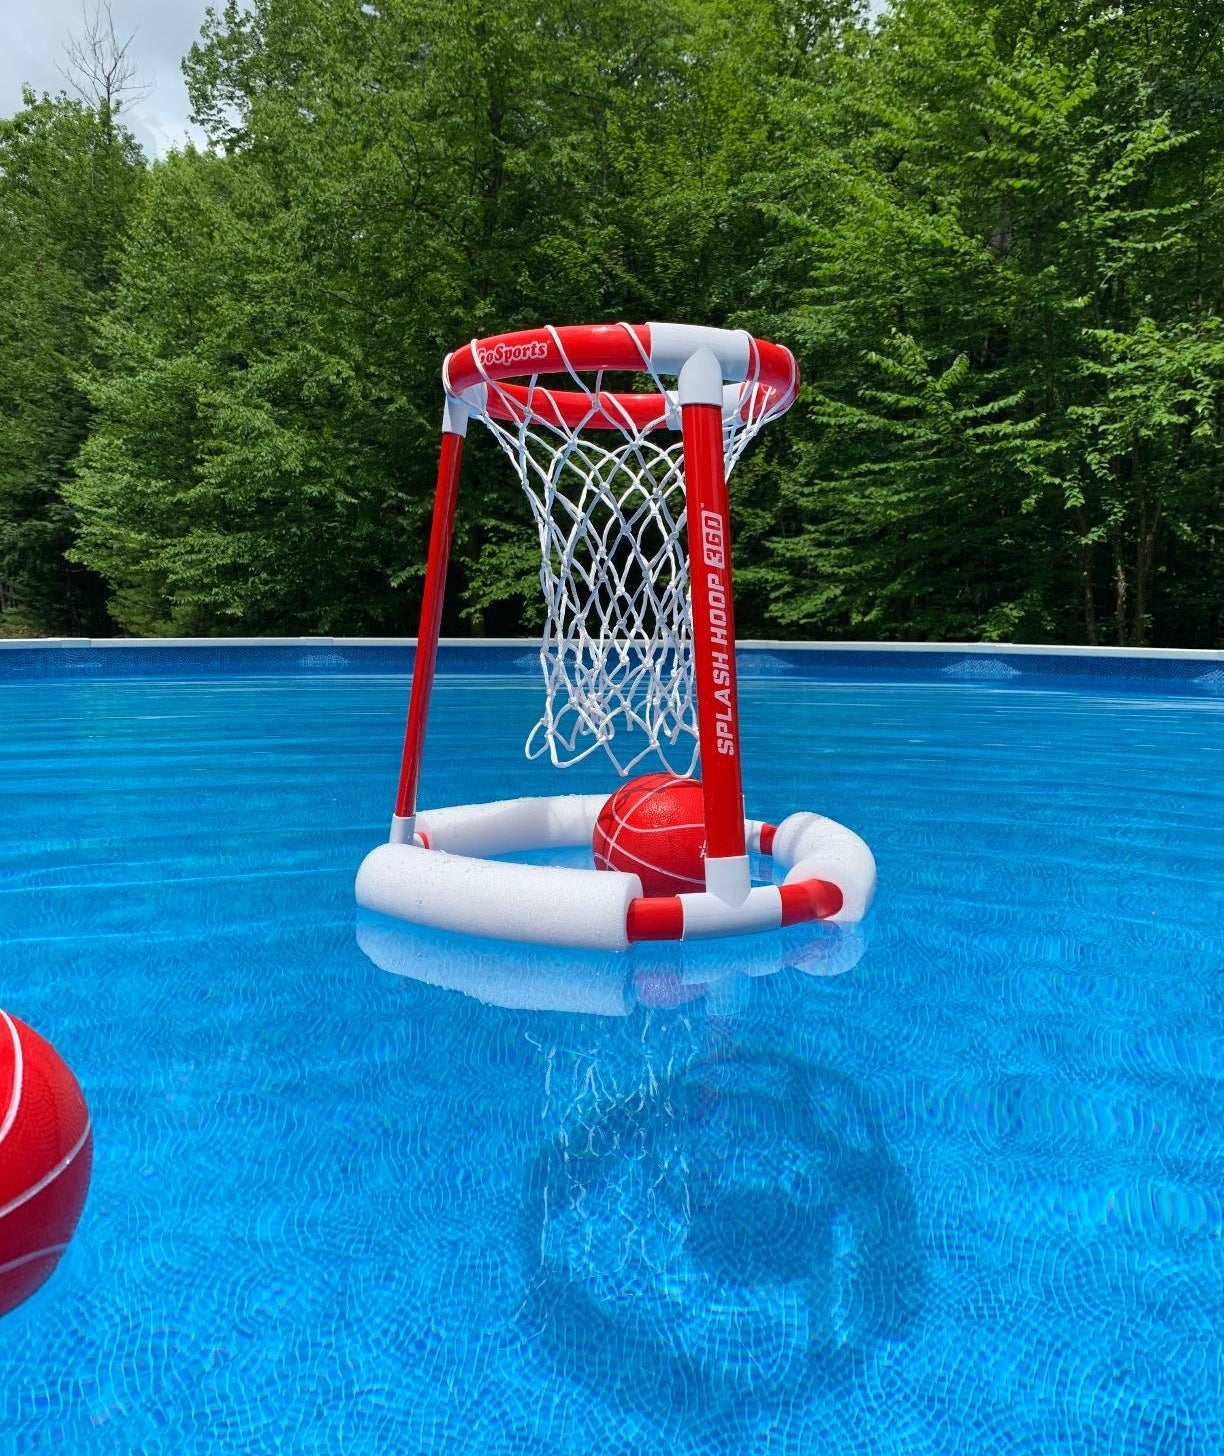 A white and red floating basketball hope in a pool 